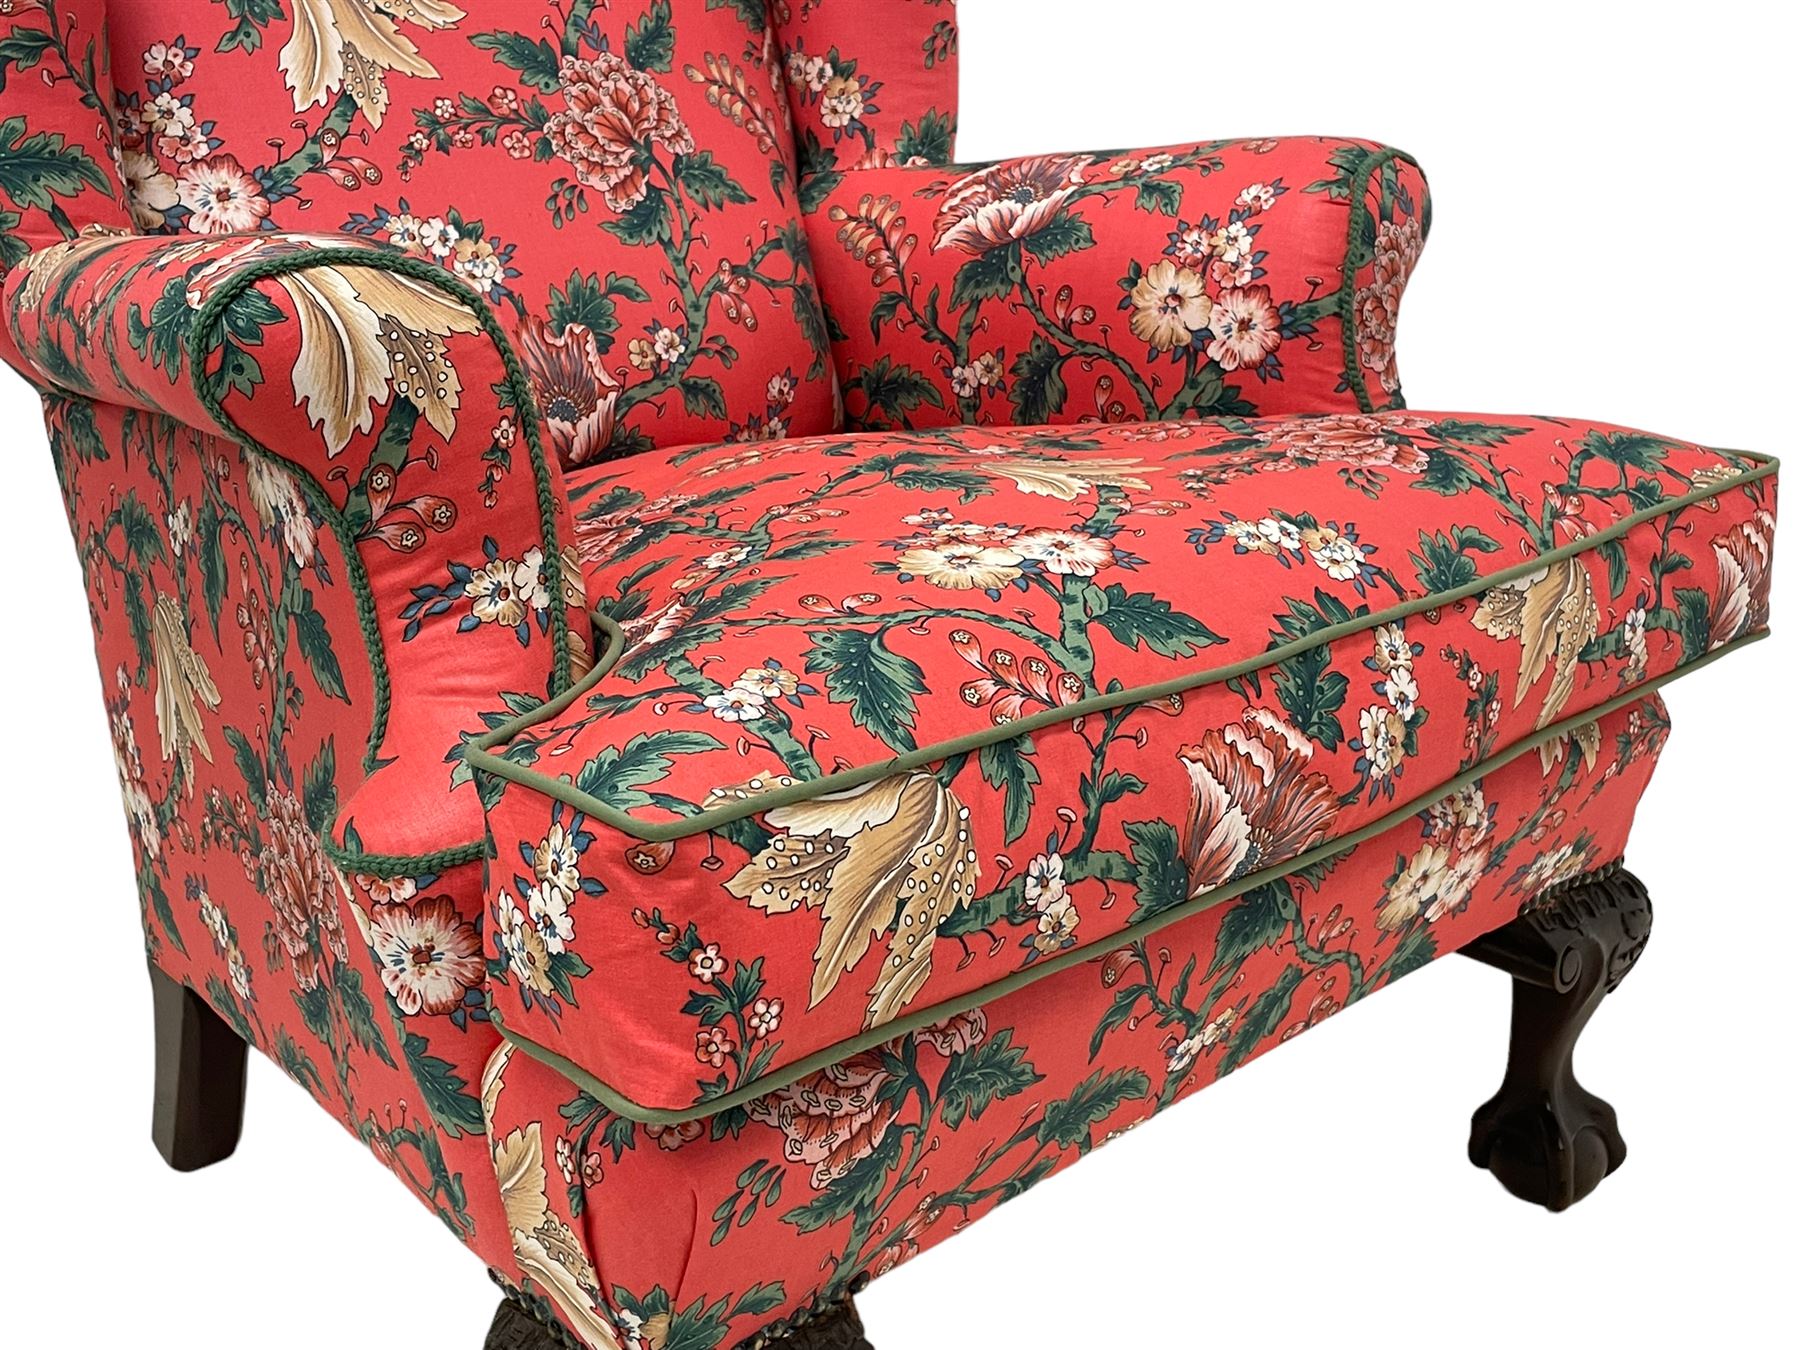 Late 19th to early 20th century wingback armchair - Image 4 of 9